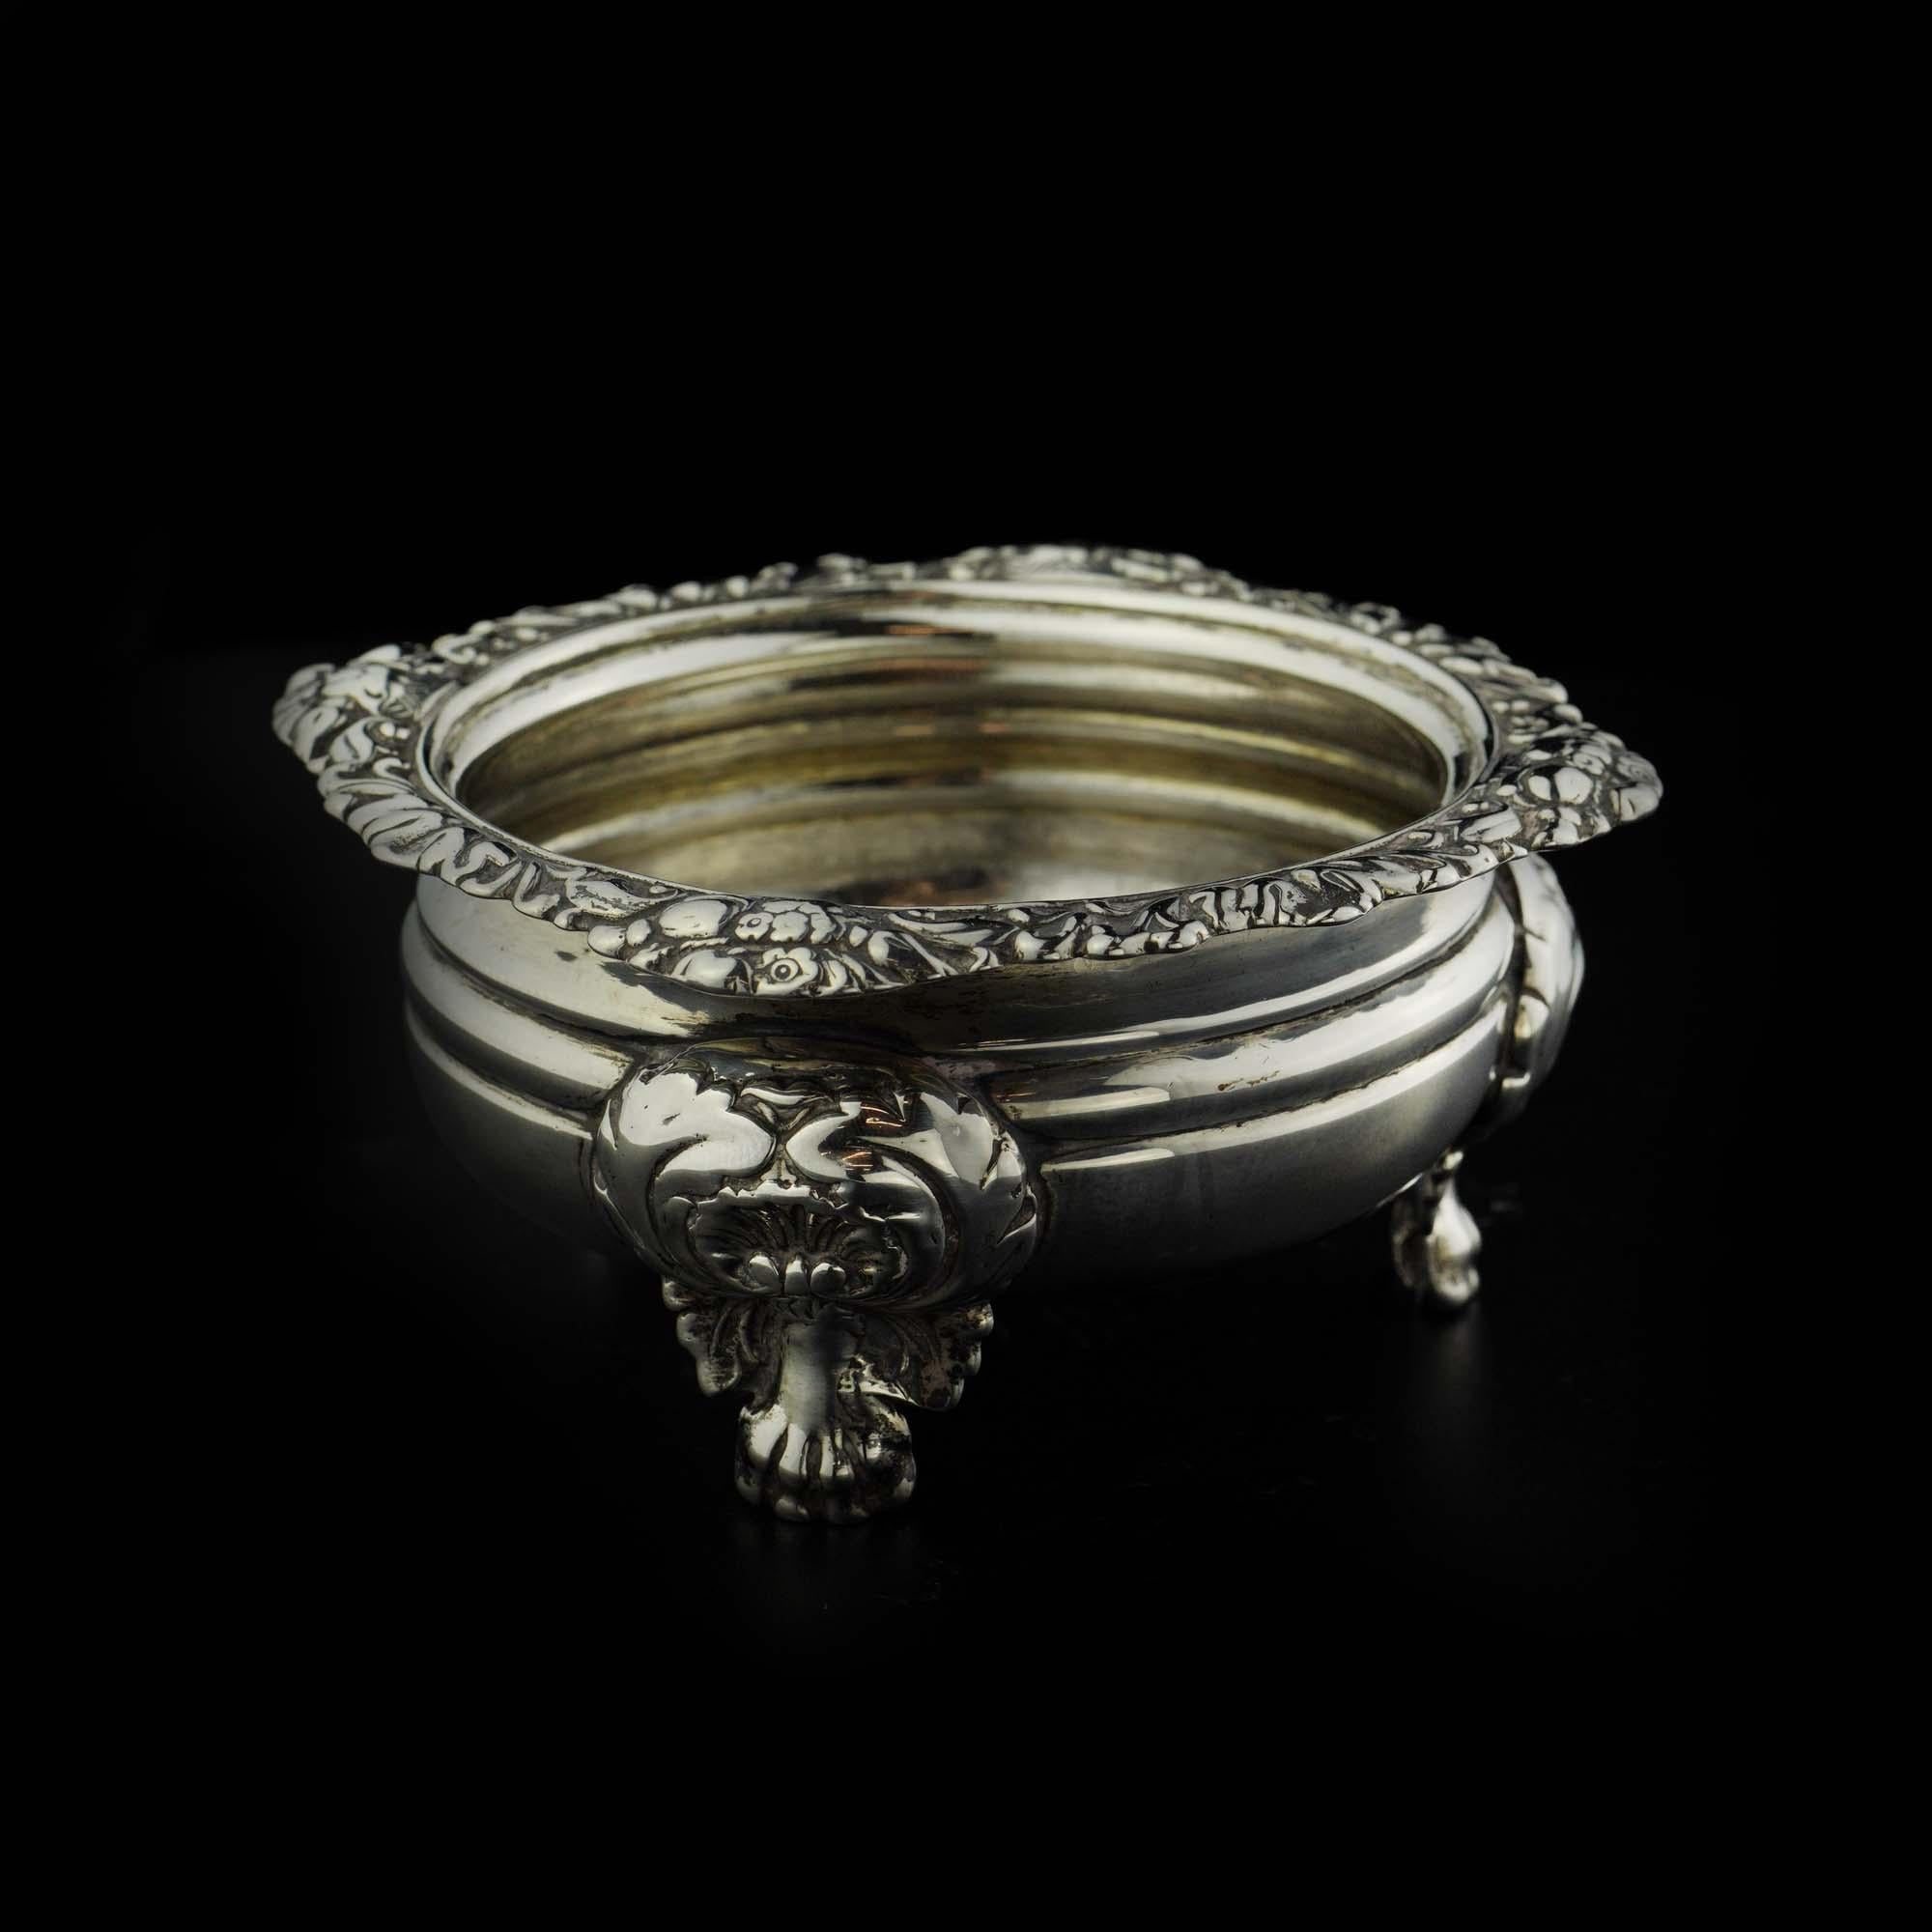 Antique George IV sterling silver salt cellar on three feet.
Maker: Thomas Jemmett & John Howe
Made in England, London, 1819
Fully hallmarked.

Approx. dimensions :
Diameter x height: 8.5 x 4.2 cm
Total weight: 131 grams

Condition: Cellar